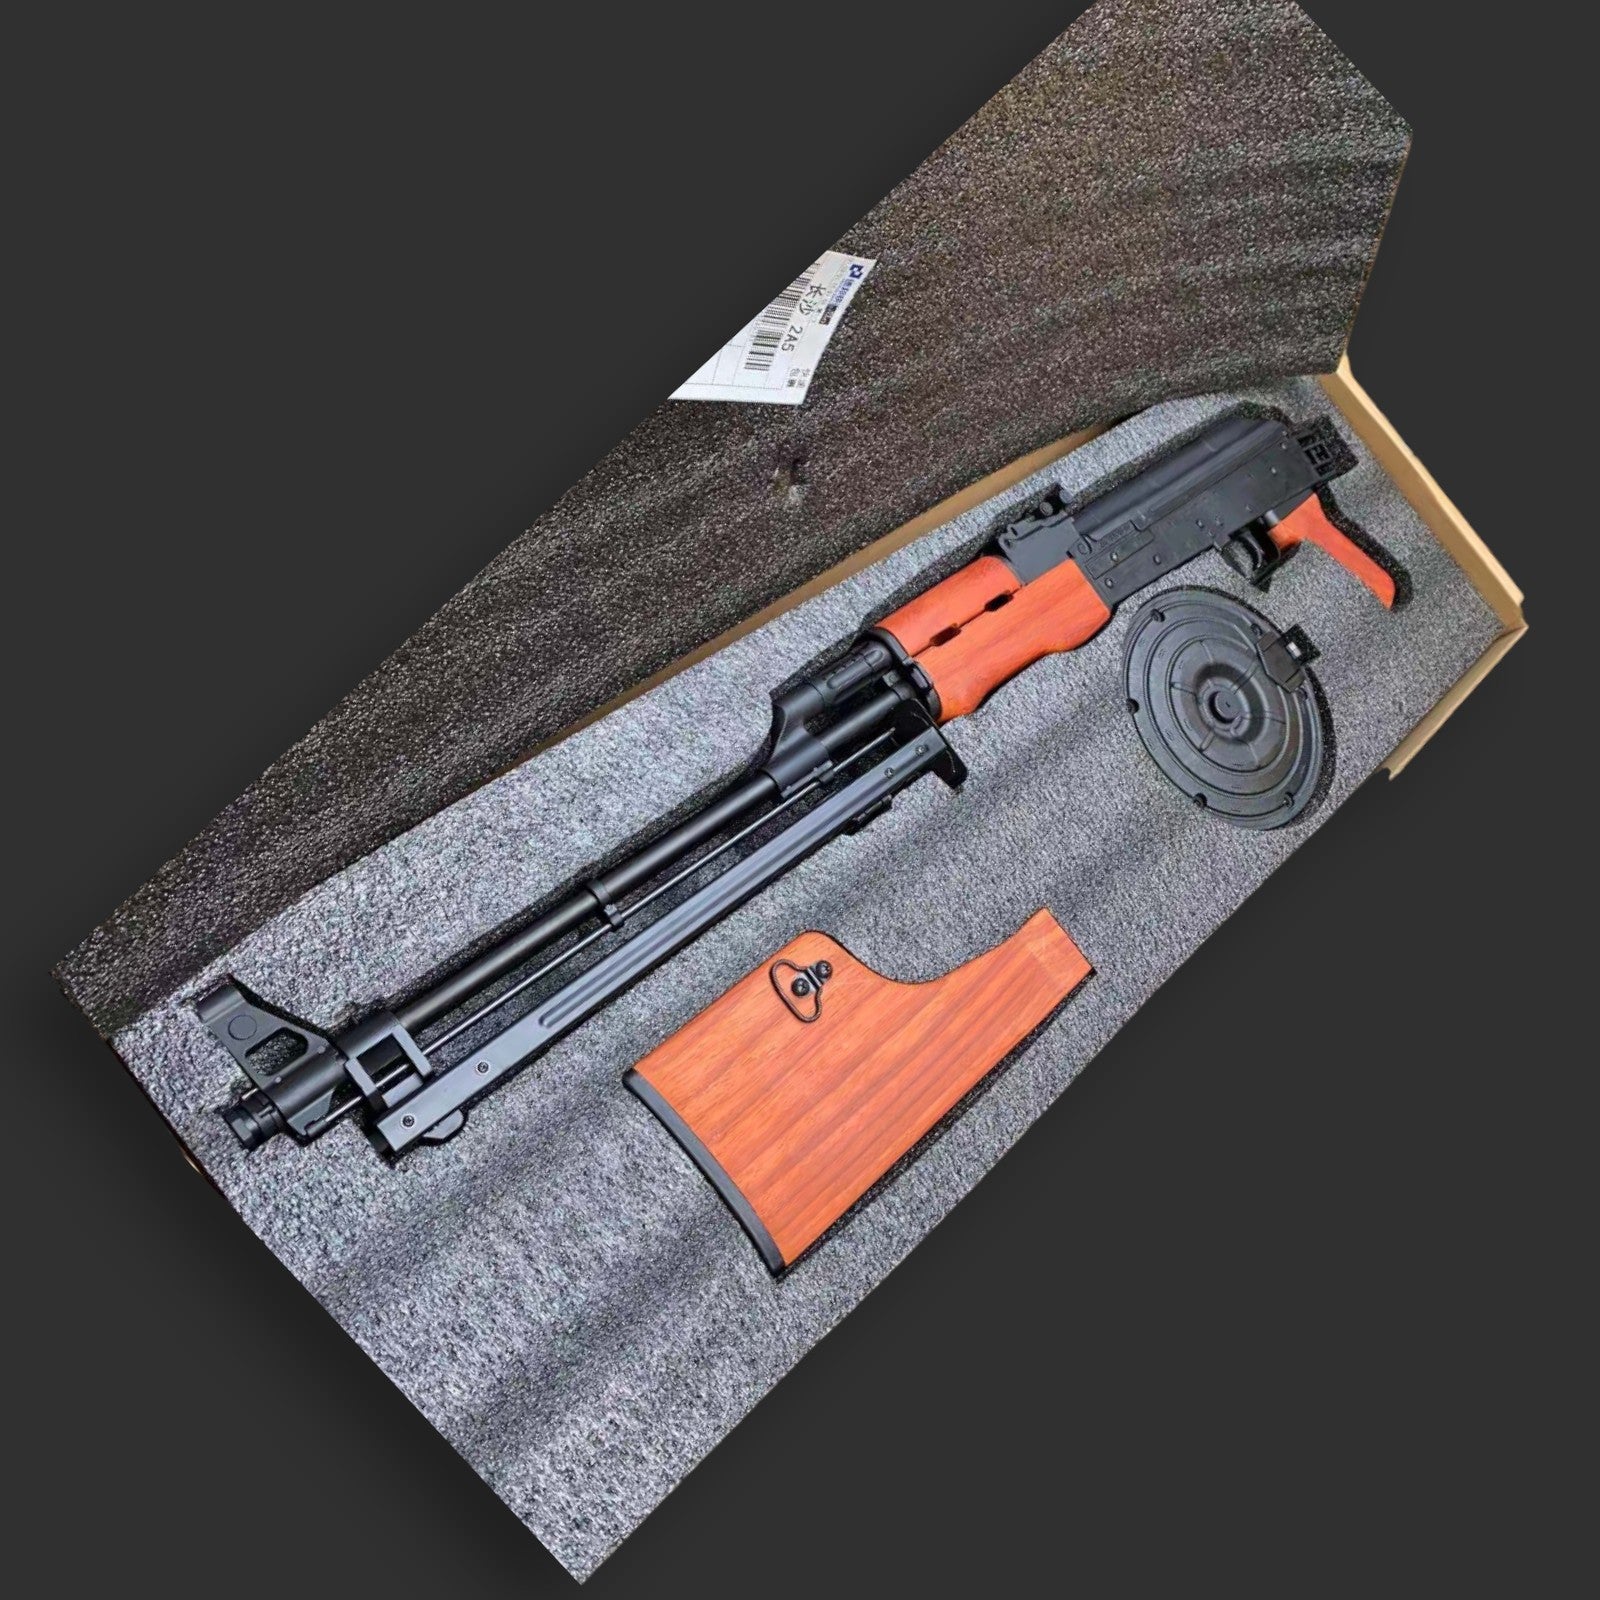 A disassembled MST RPK Gel blaster with a wooden stock and drum magazine, showcasing an authentic RPK design by BlasterMasters, is placed in a padded carrying case. A small object is seen tucked in a pocket inside the lid of the case.